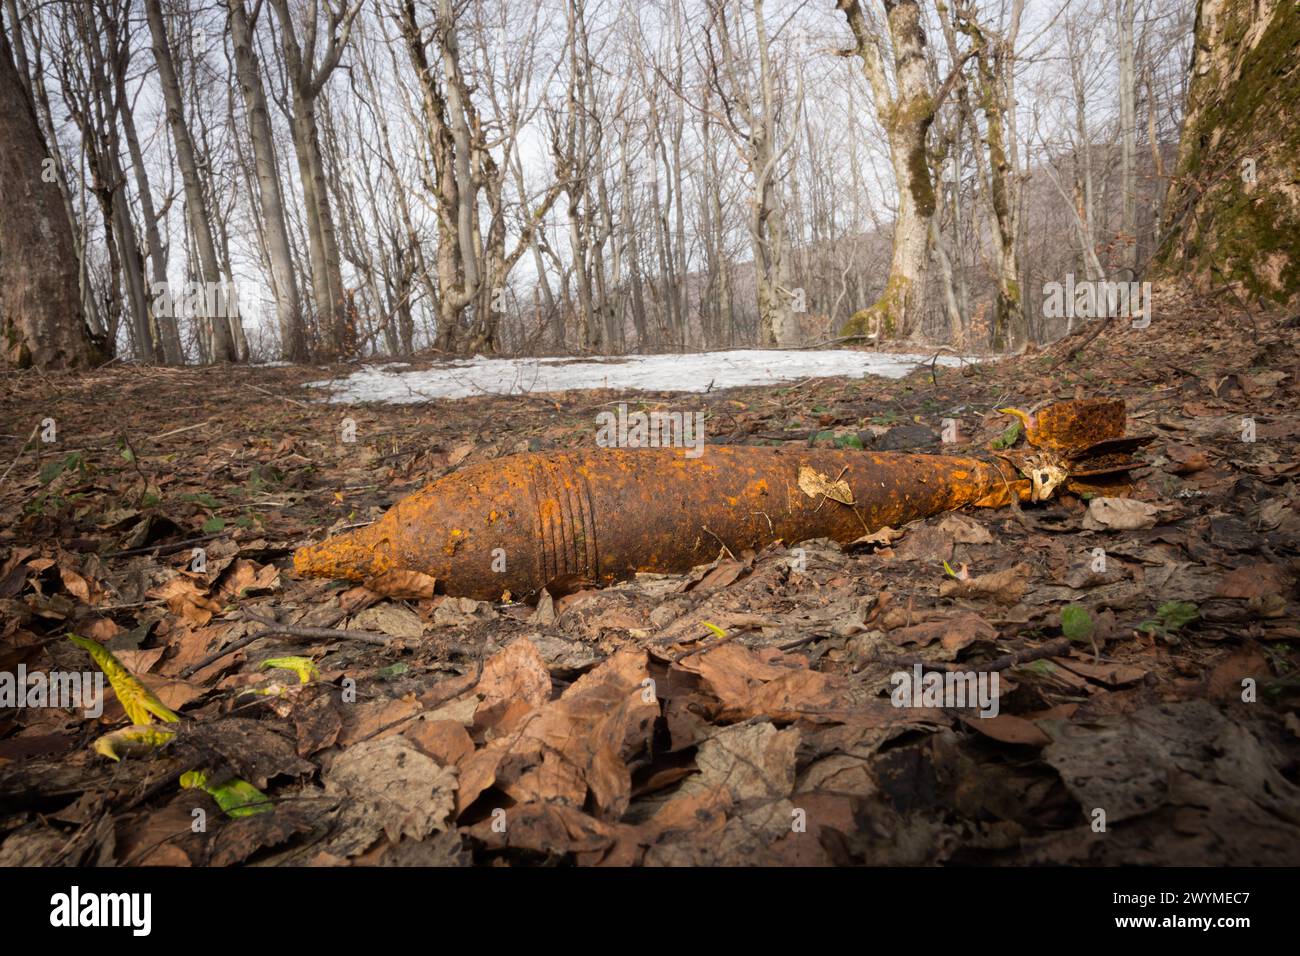 UXO unexploded ordnance - Soviet F-843 120mm mortar bomb, from M1938 mortar, from World War II. Found in the Eastern Carpathians in Poland Stock Photo